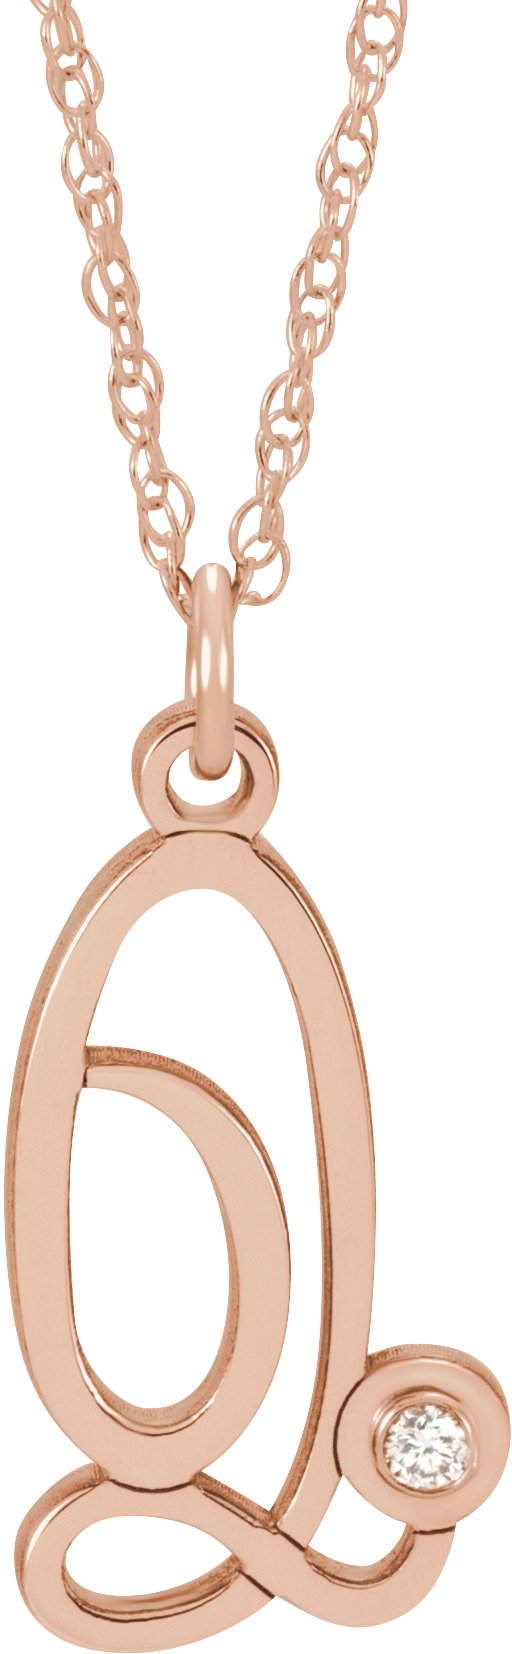 14K Rose Gold-Plated Sterling Silver .02 CT Diamond Script Initial Q 16-18" Necklace